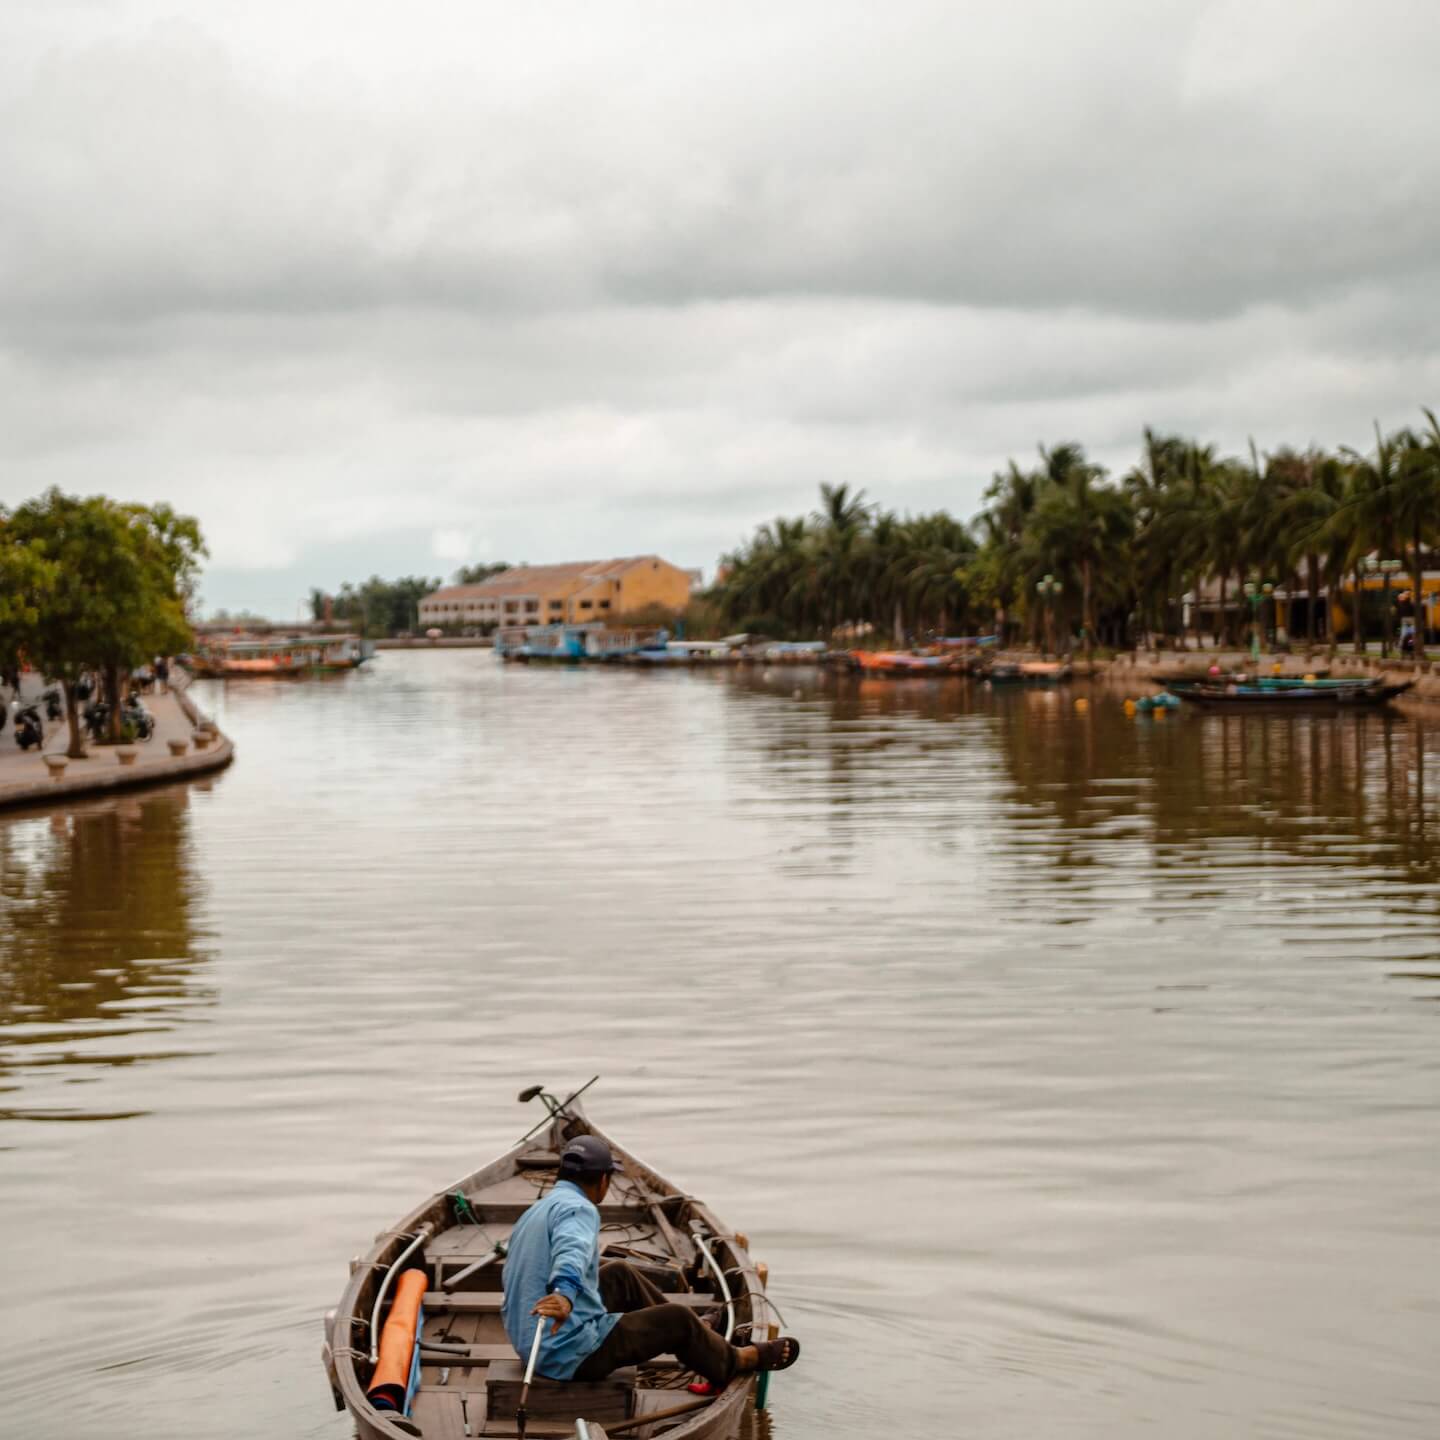 Things to do in Hoi An - River boat cruise